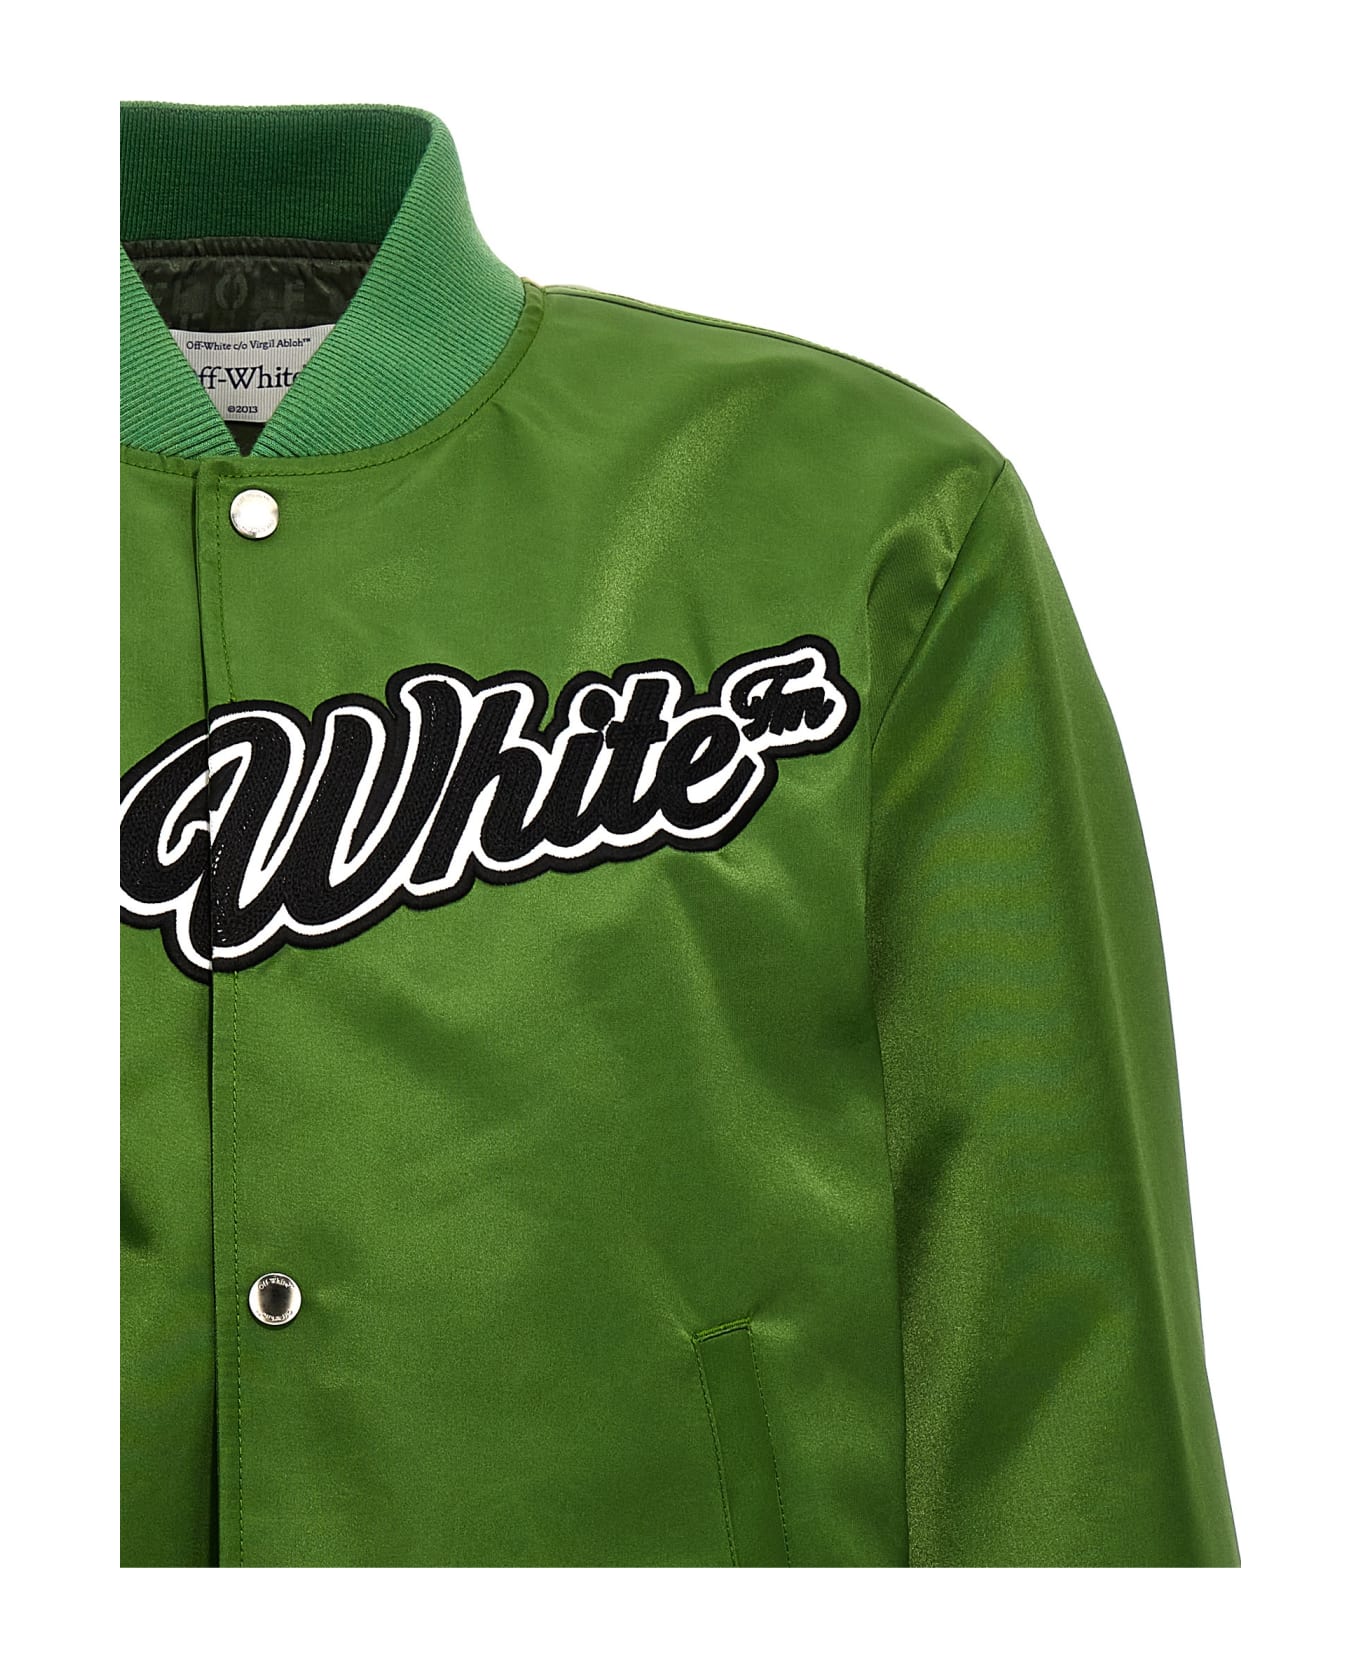 Off-White 'willow' Bomber Jacket - Green